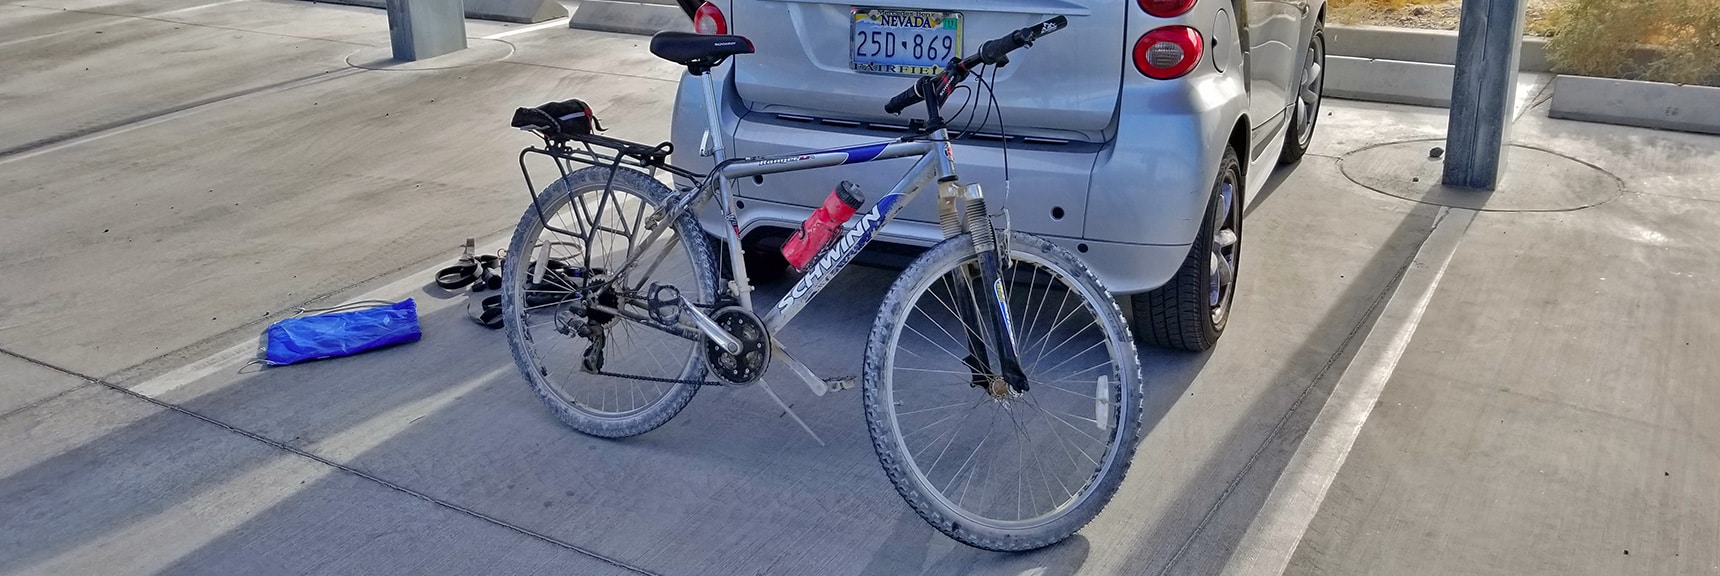 Mountain Bike Successfully Dismounted, Rack System Stored, Took About 7 Minutes | Smart Car Bike Rack and Mountain Bike Test, Sheep Range, Nevada